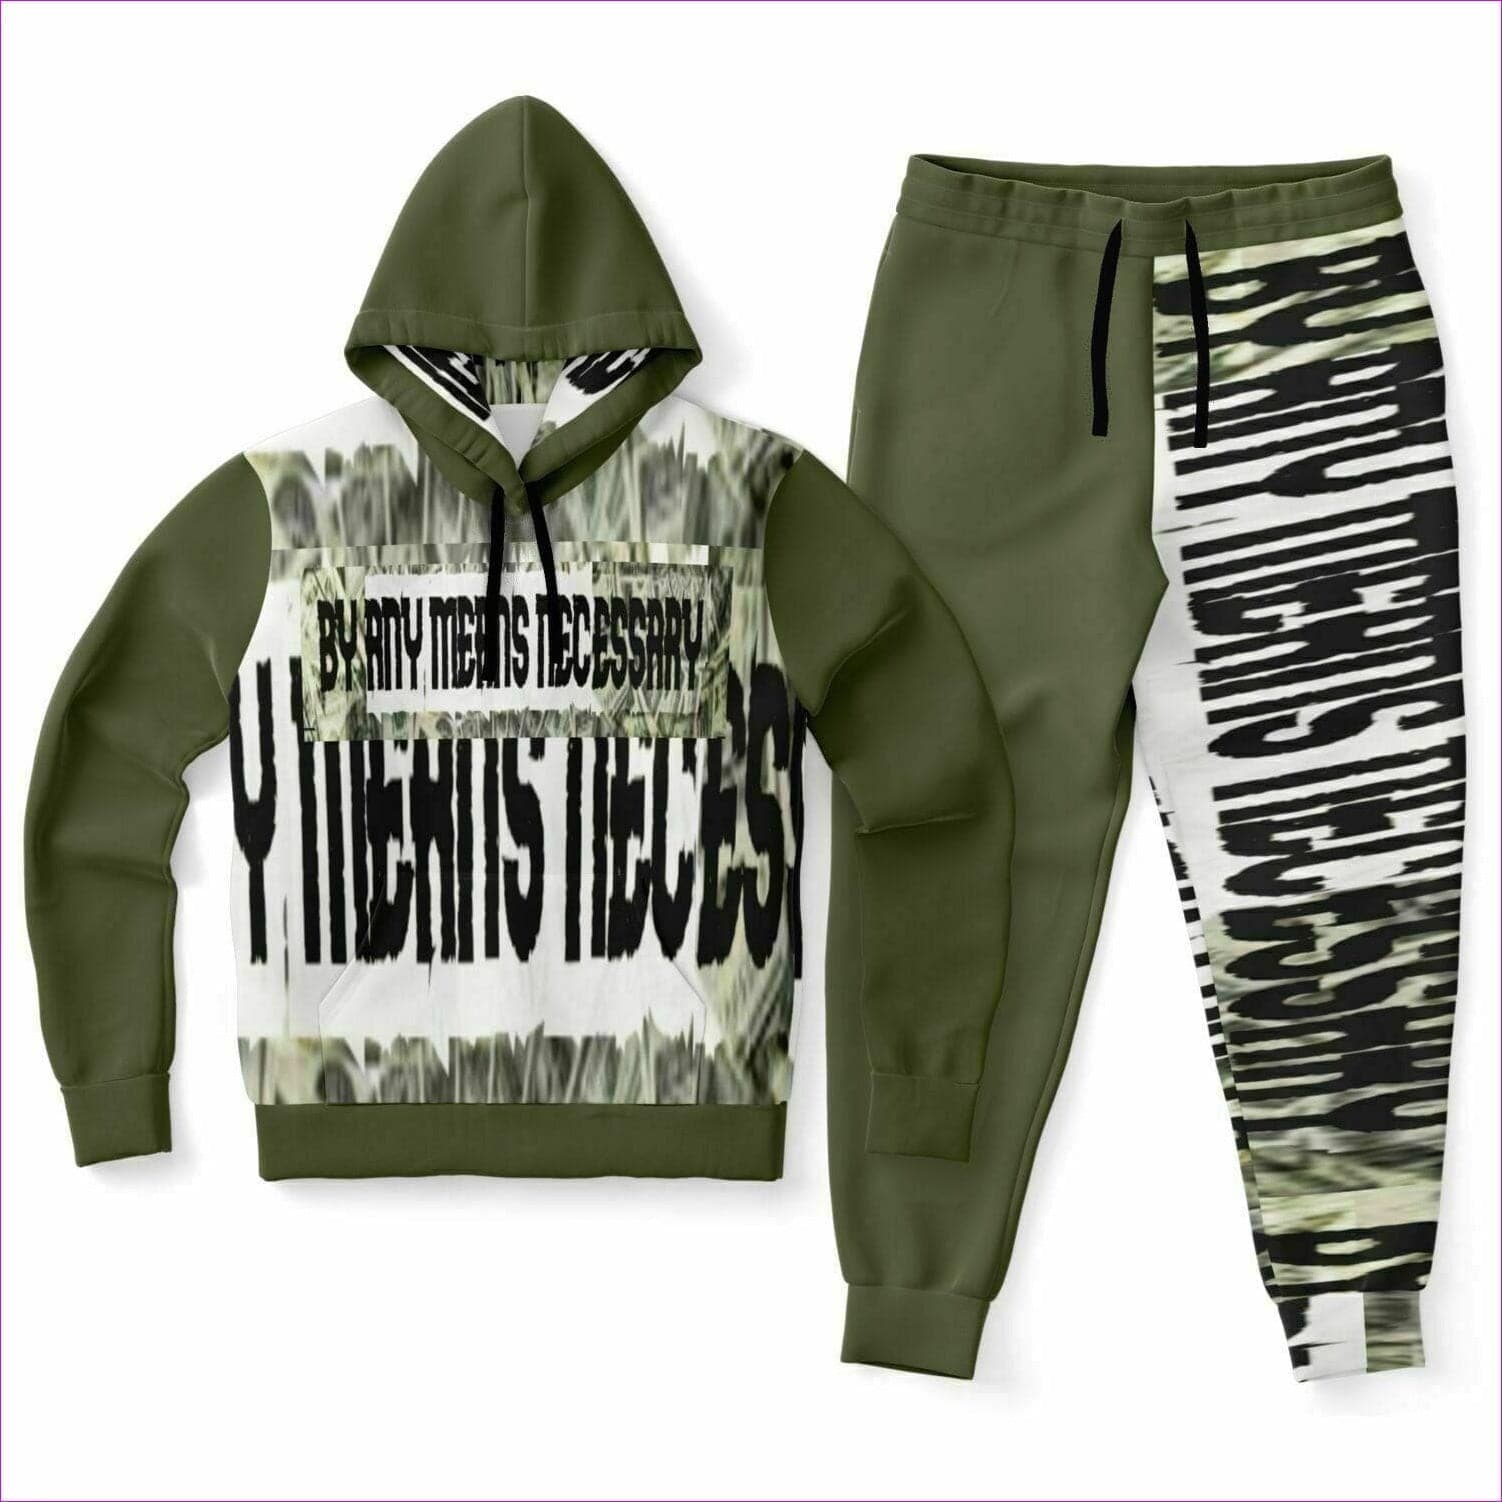 - B.A.M.N (By Any Means Necessary) Unisex Premium Jogging Set 2 - unisex jogging set at TFC&H Co.